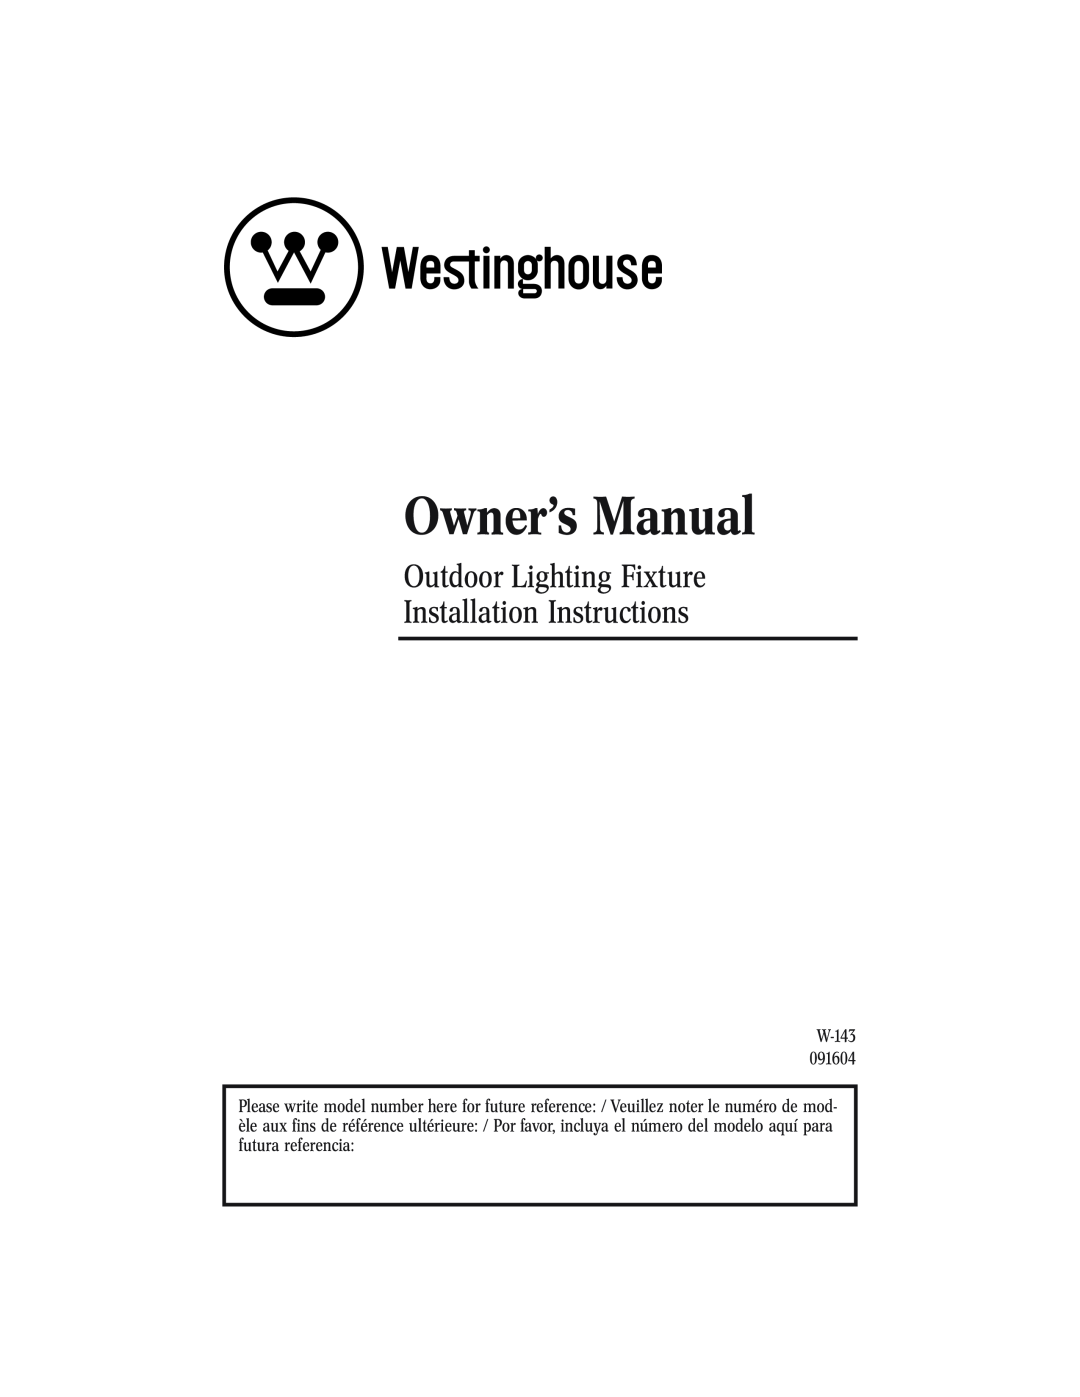 Westinghouse w-143 owner manual Owner’s Manual, Outdoor Lighting Fixture Installation Instructions 